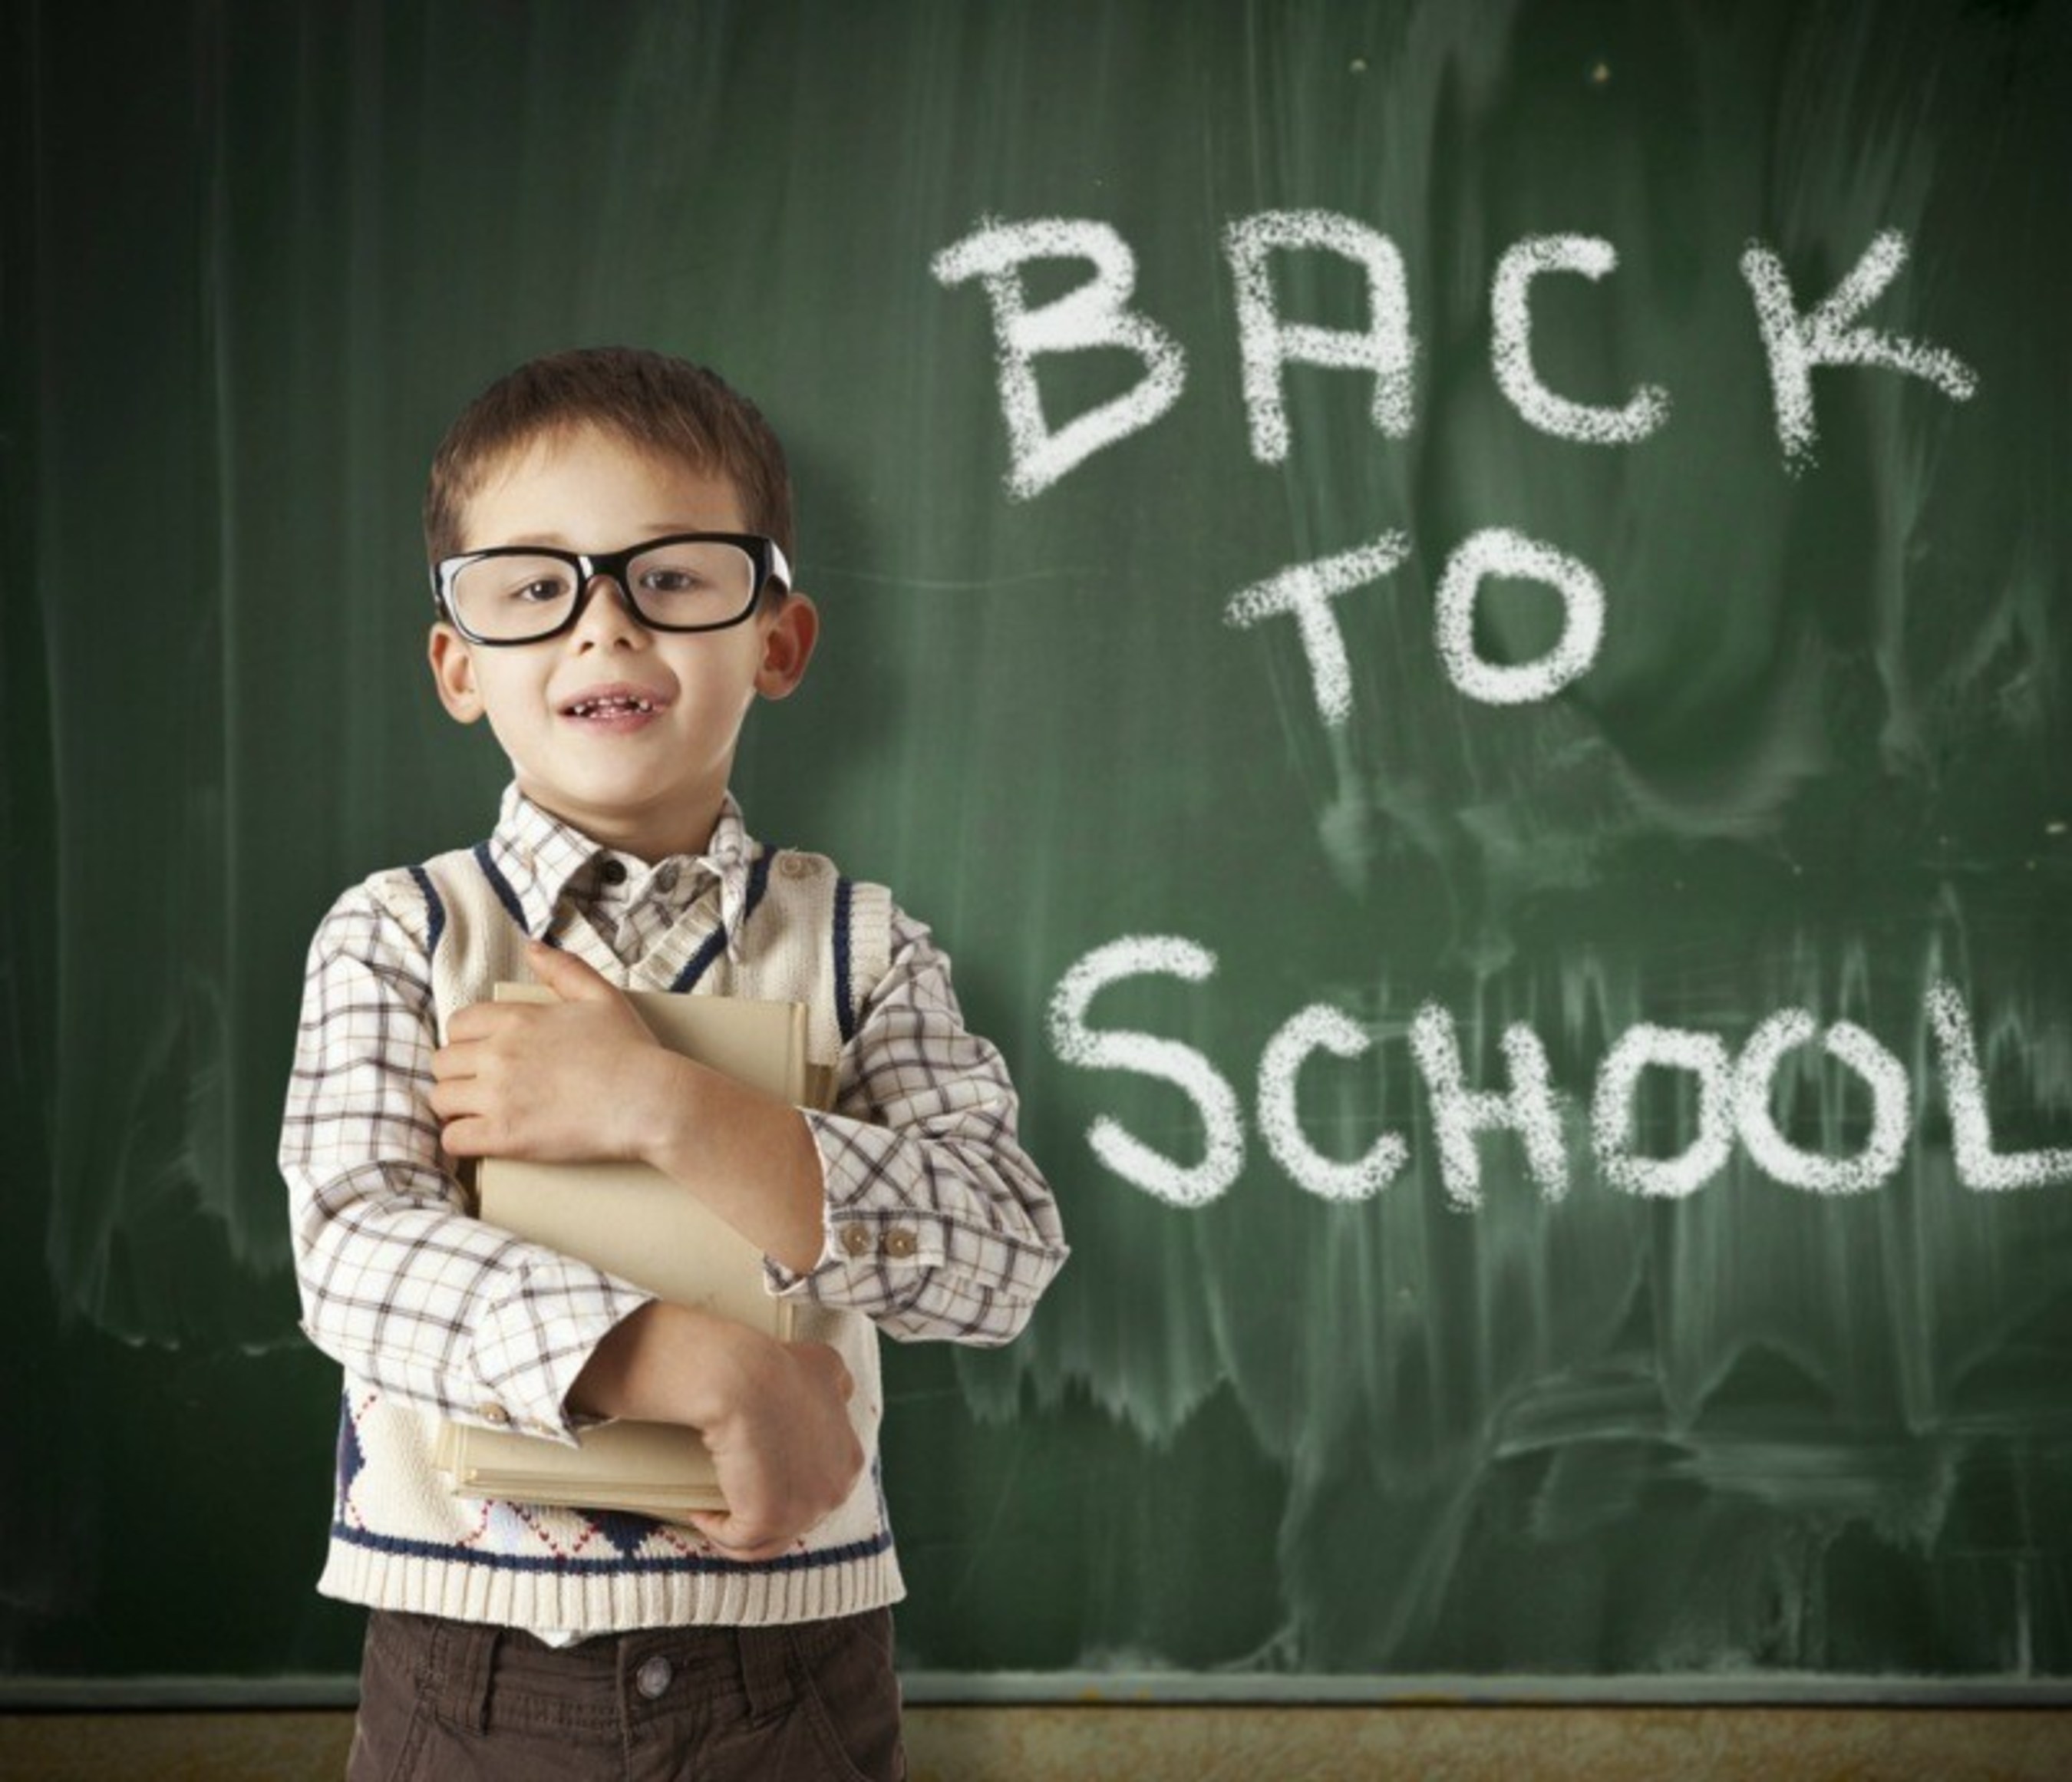 The American Academy of Ophthalmology shares back-to-school tips during Children's Eye Health and Safety Month in August.